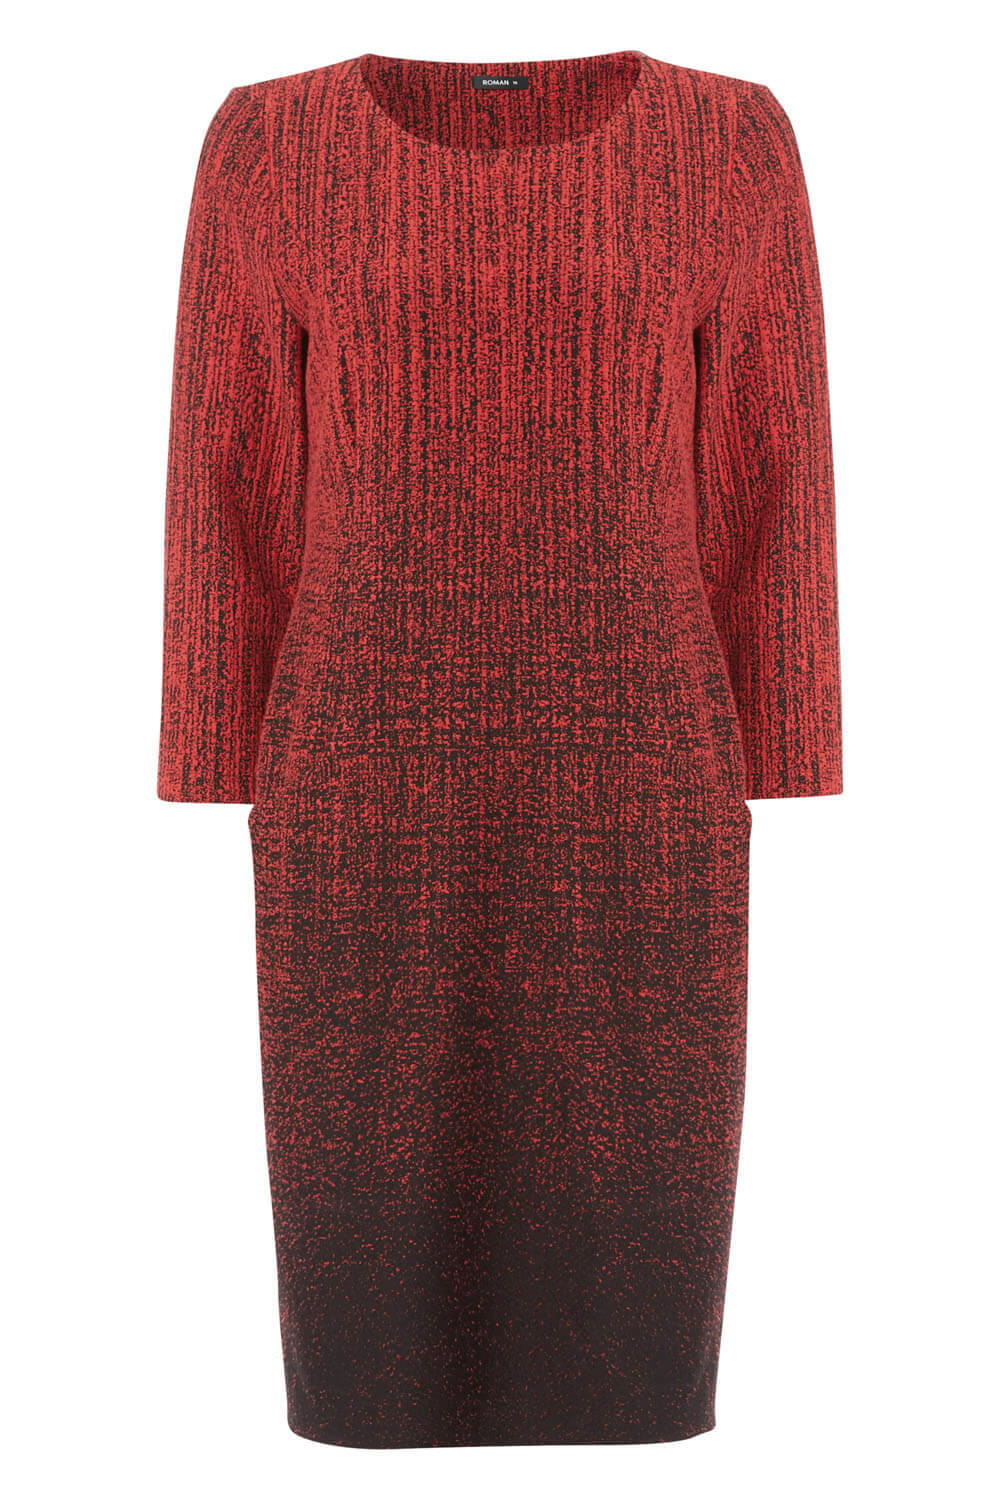 Red Ombre Textured Shift Dress, Image 4 of 5